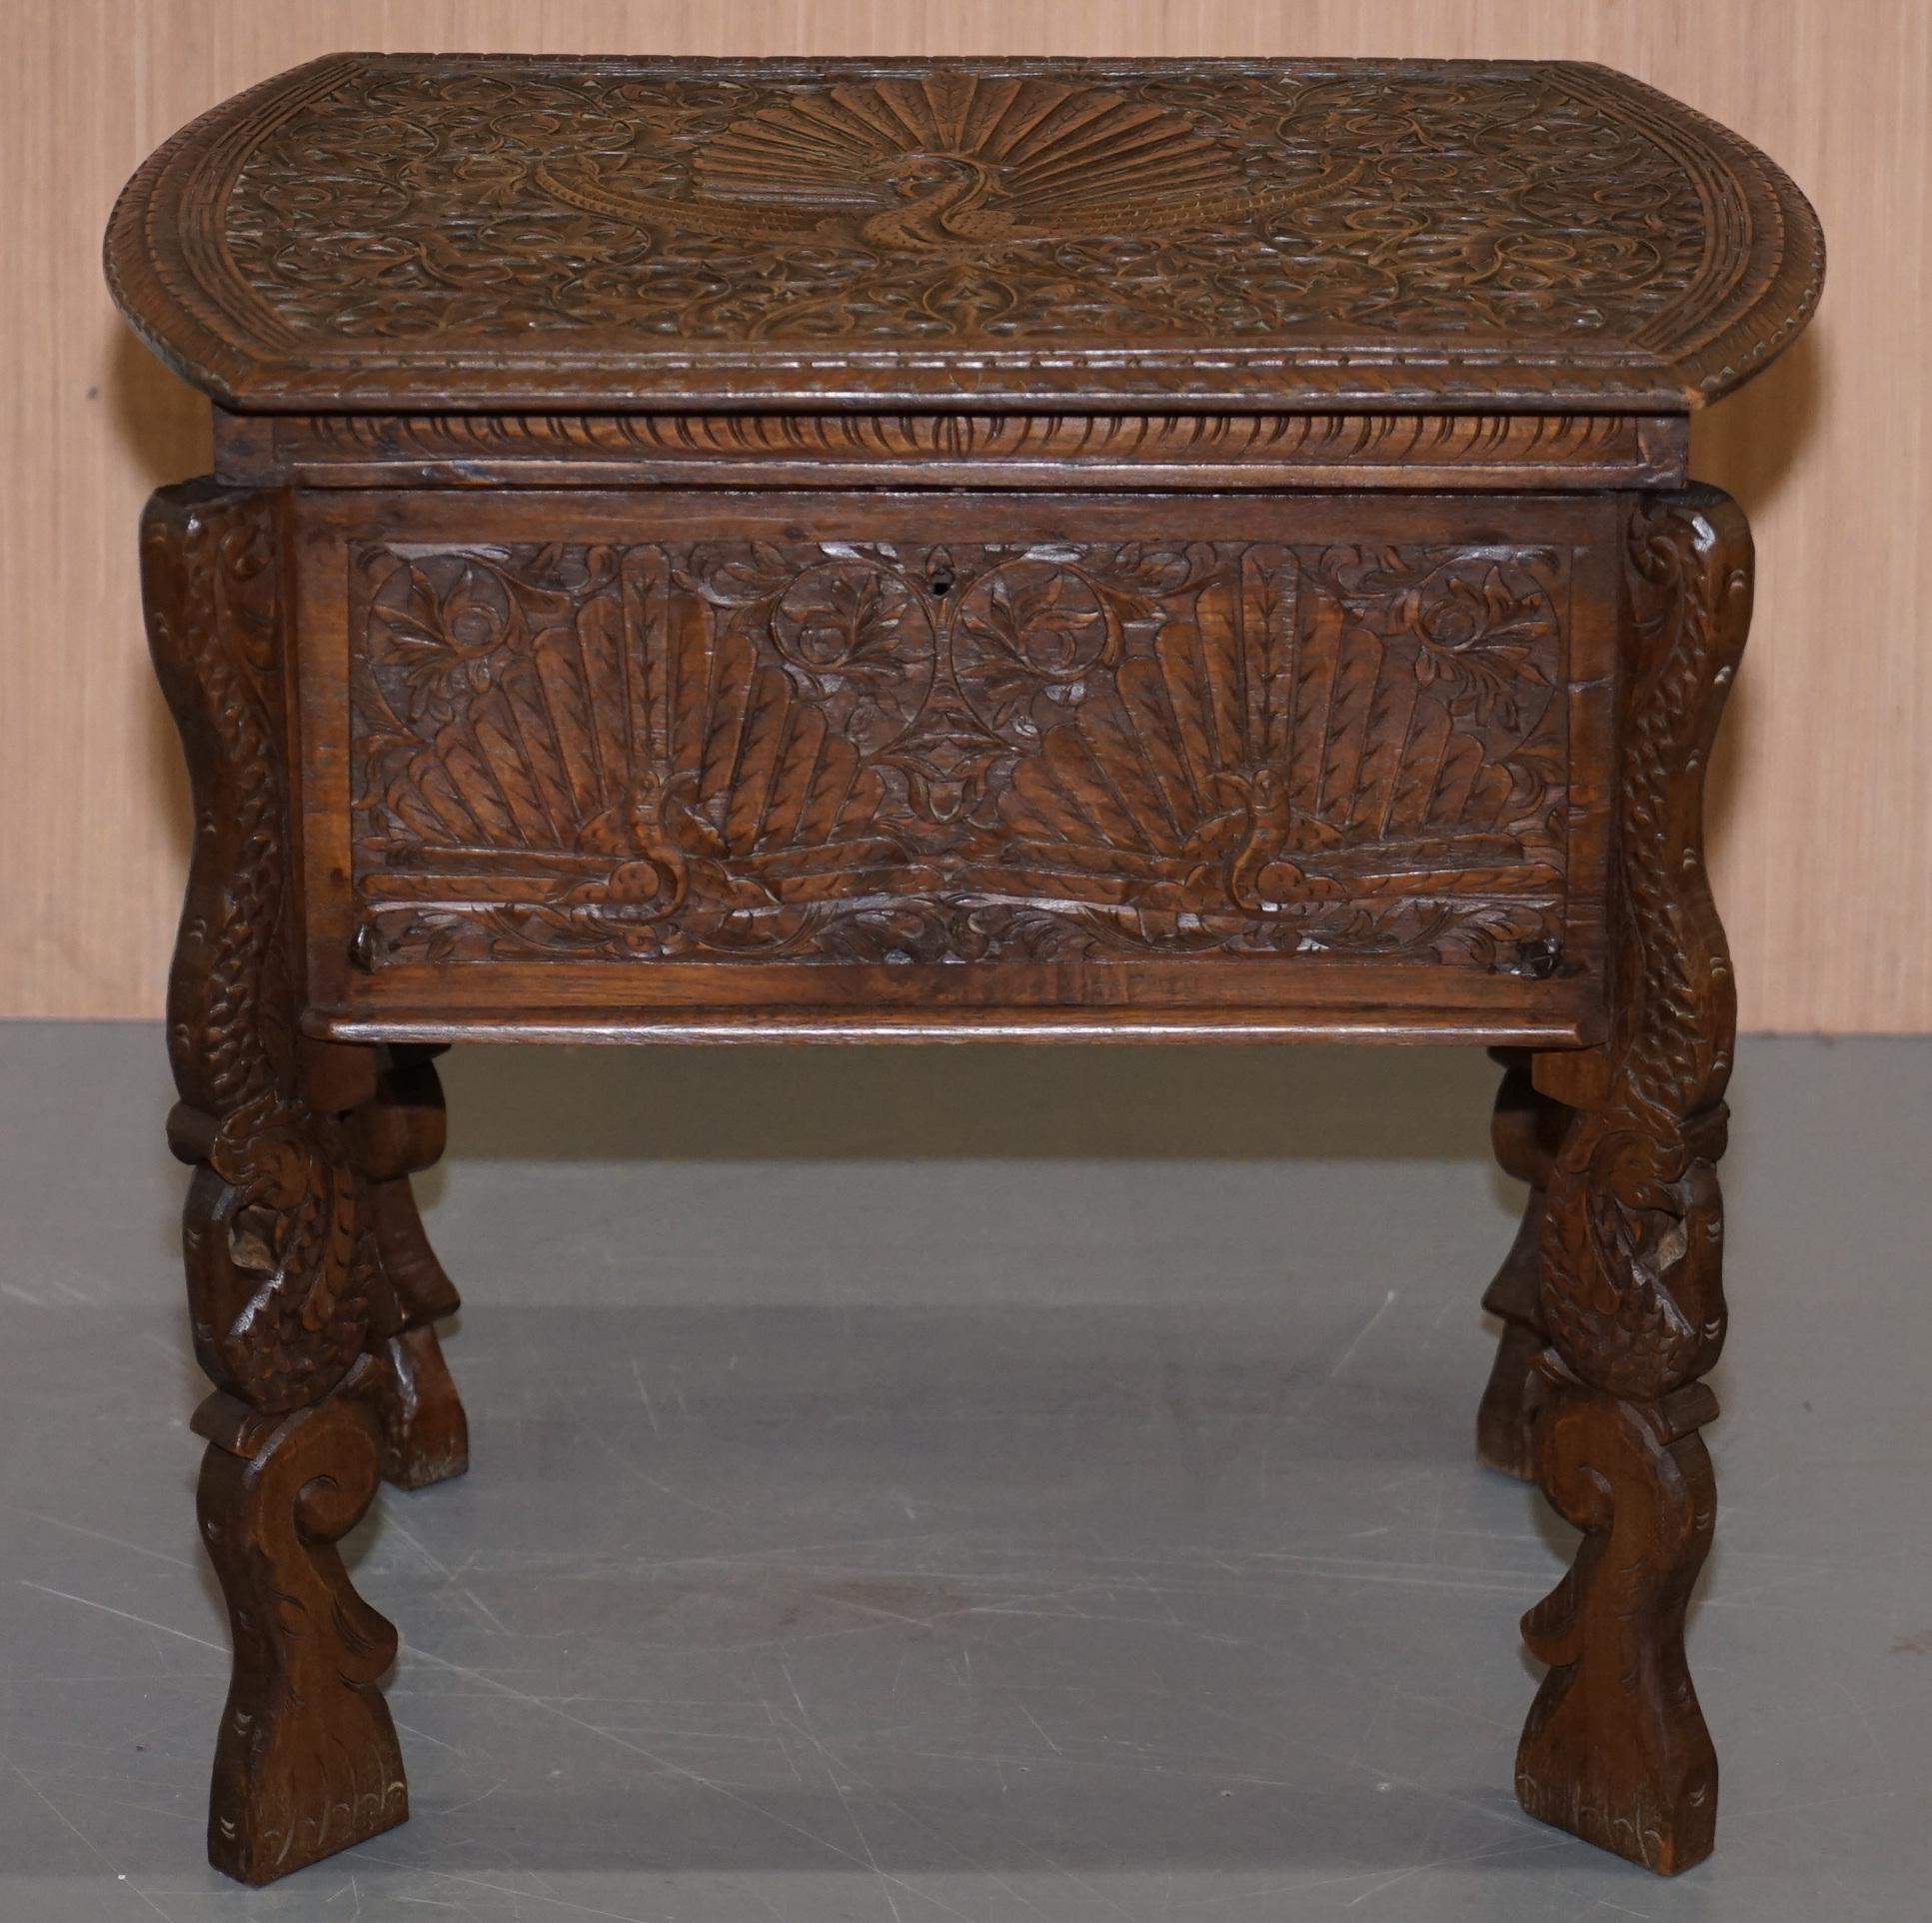 We are delighted to offer for sale this absolutely stunning original circa 1880 Burmese hand carved sewing side table or little chest with lovely peacock design

A very good looking and ornate piece of art furniture, these were made as export